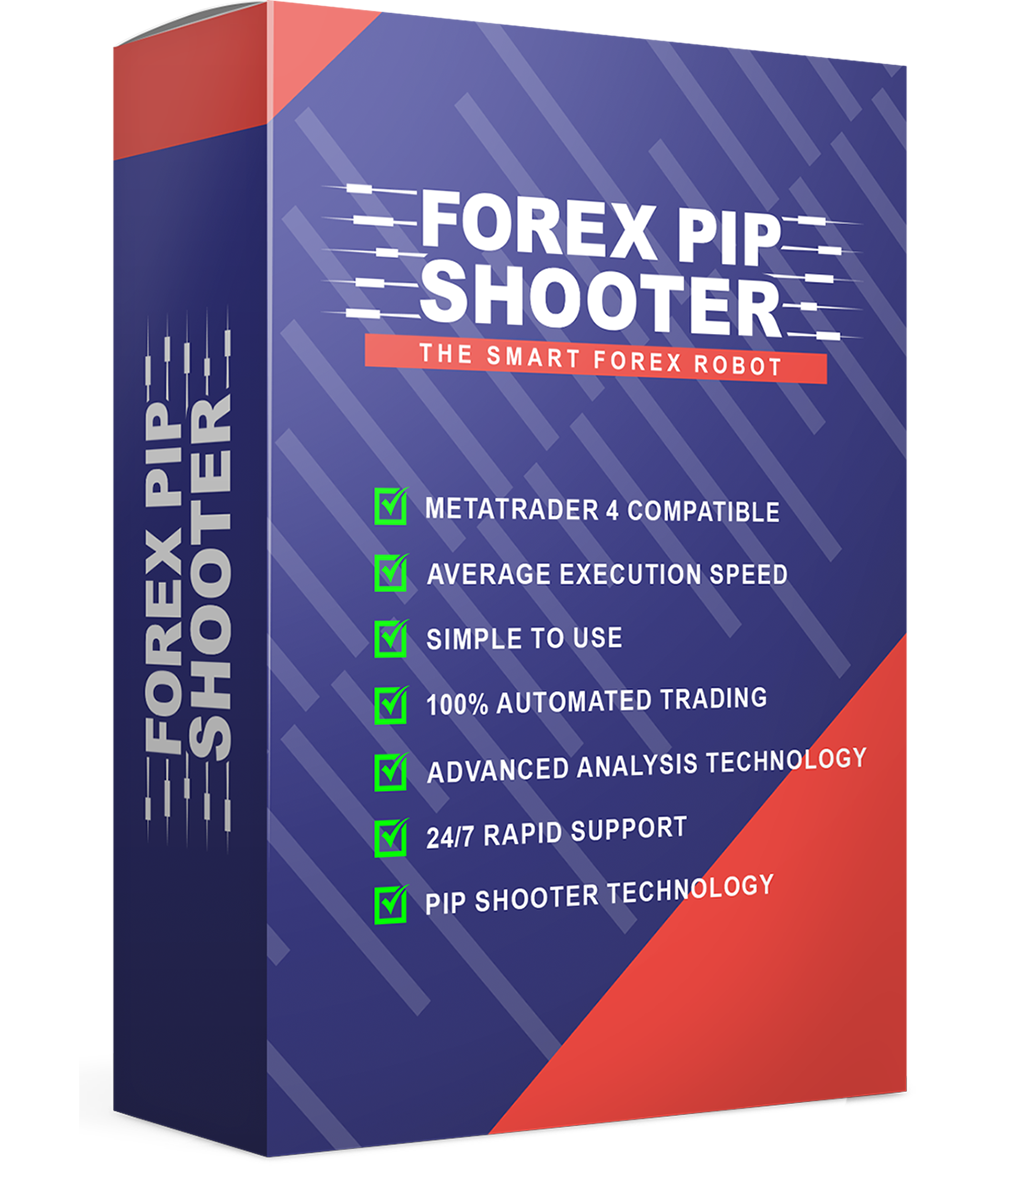 Forex Pip Shooter Shooter Pack